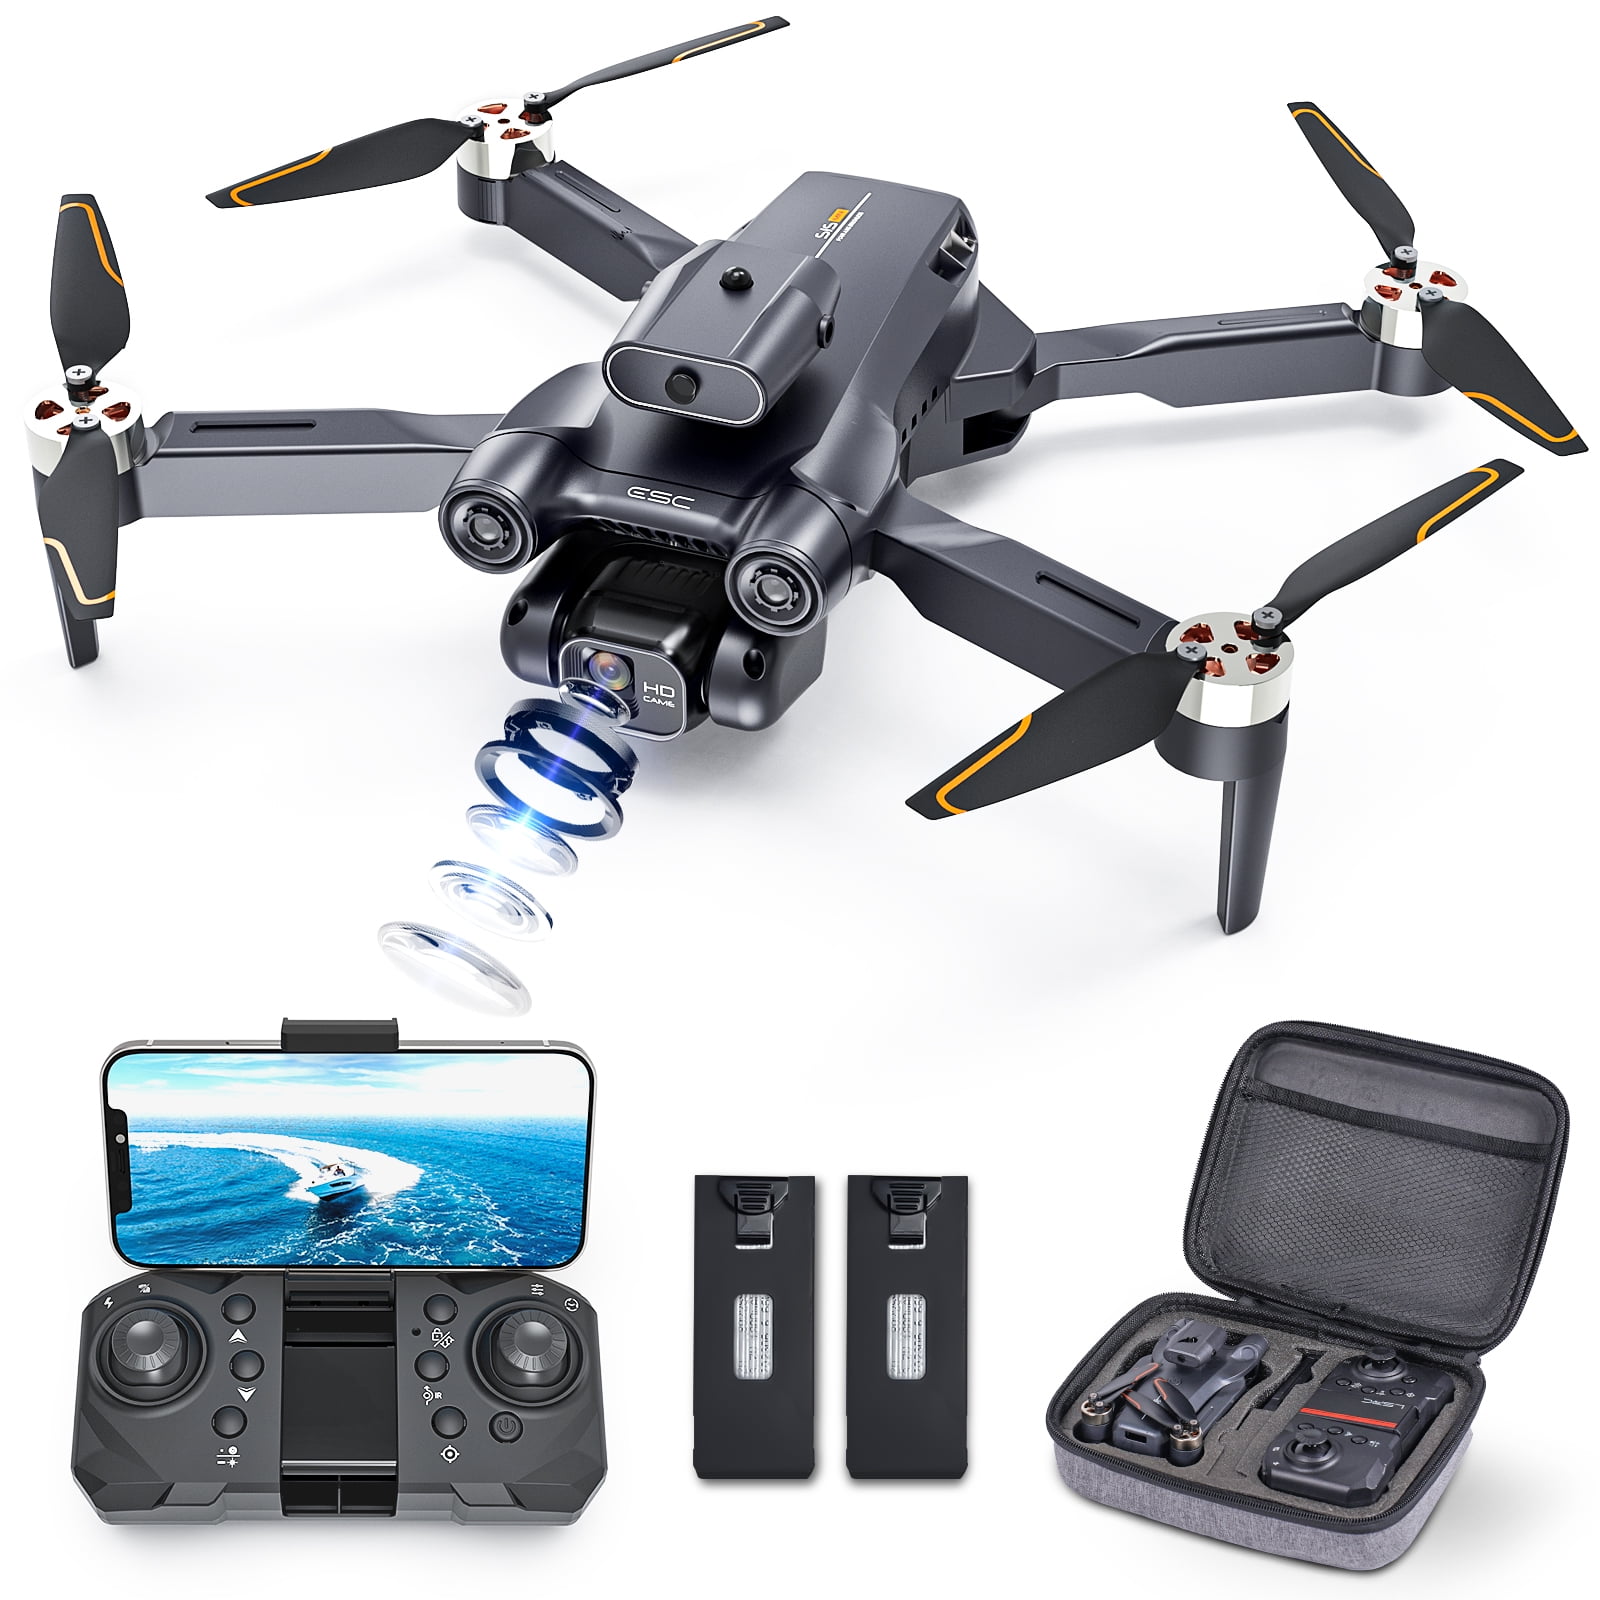 GPS Drone with Camera for Adults 4K UHD, Brushless Motor, GPS Auto Return,  5GHz FPV RC Quadcopter Auto Return Home, Altitude Hold, Follow Me, Custom